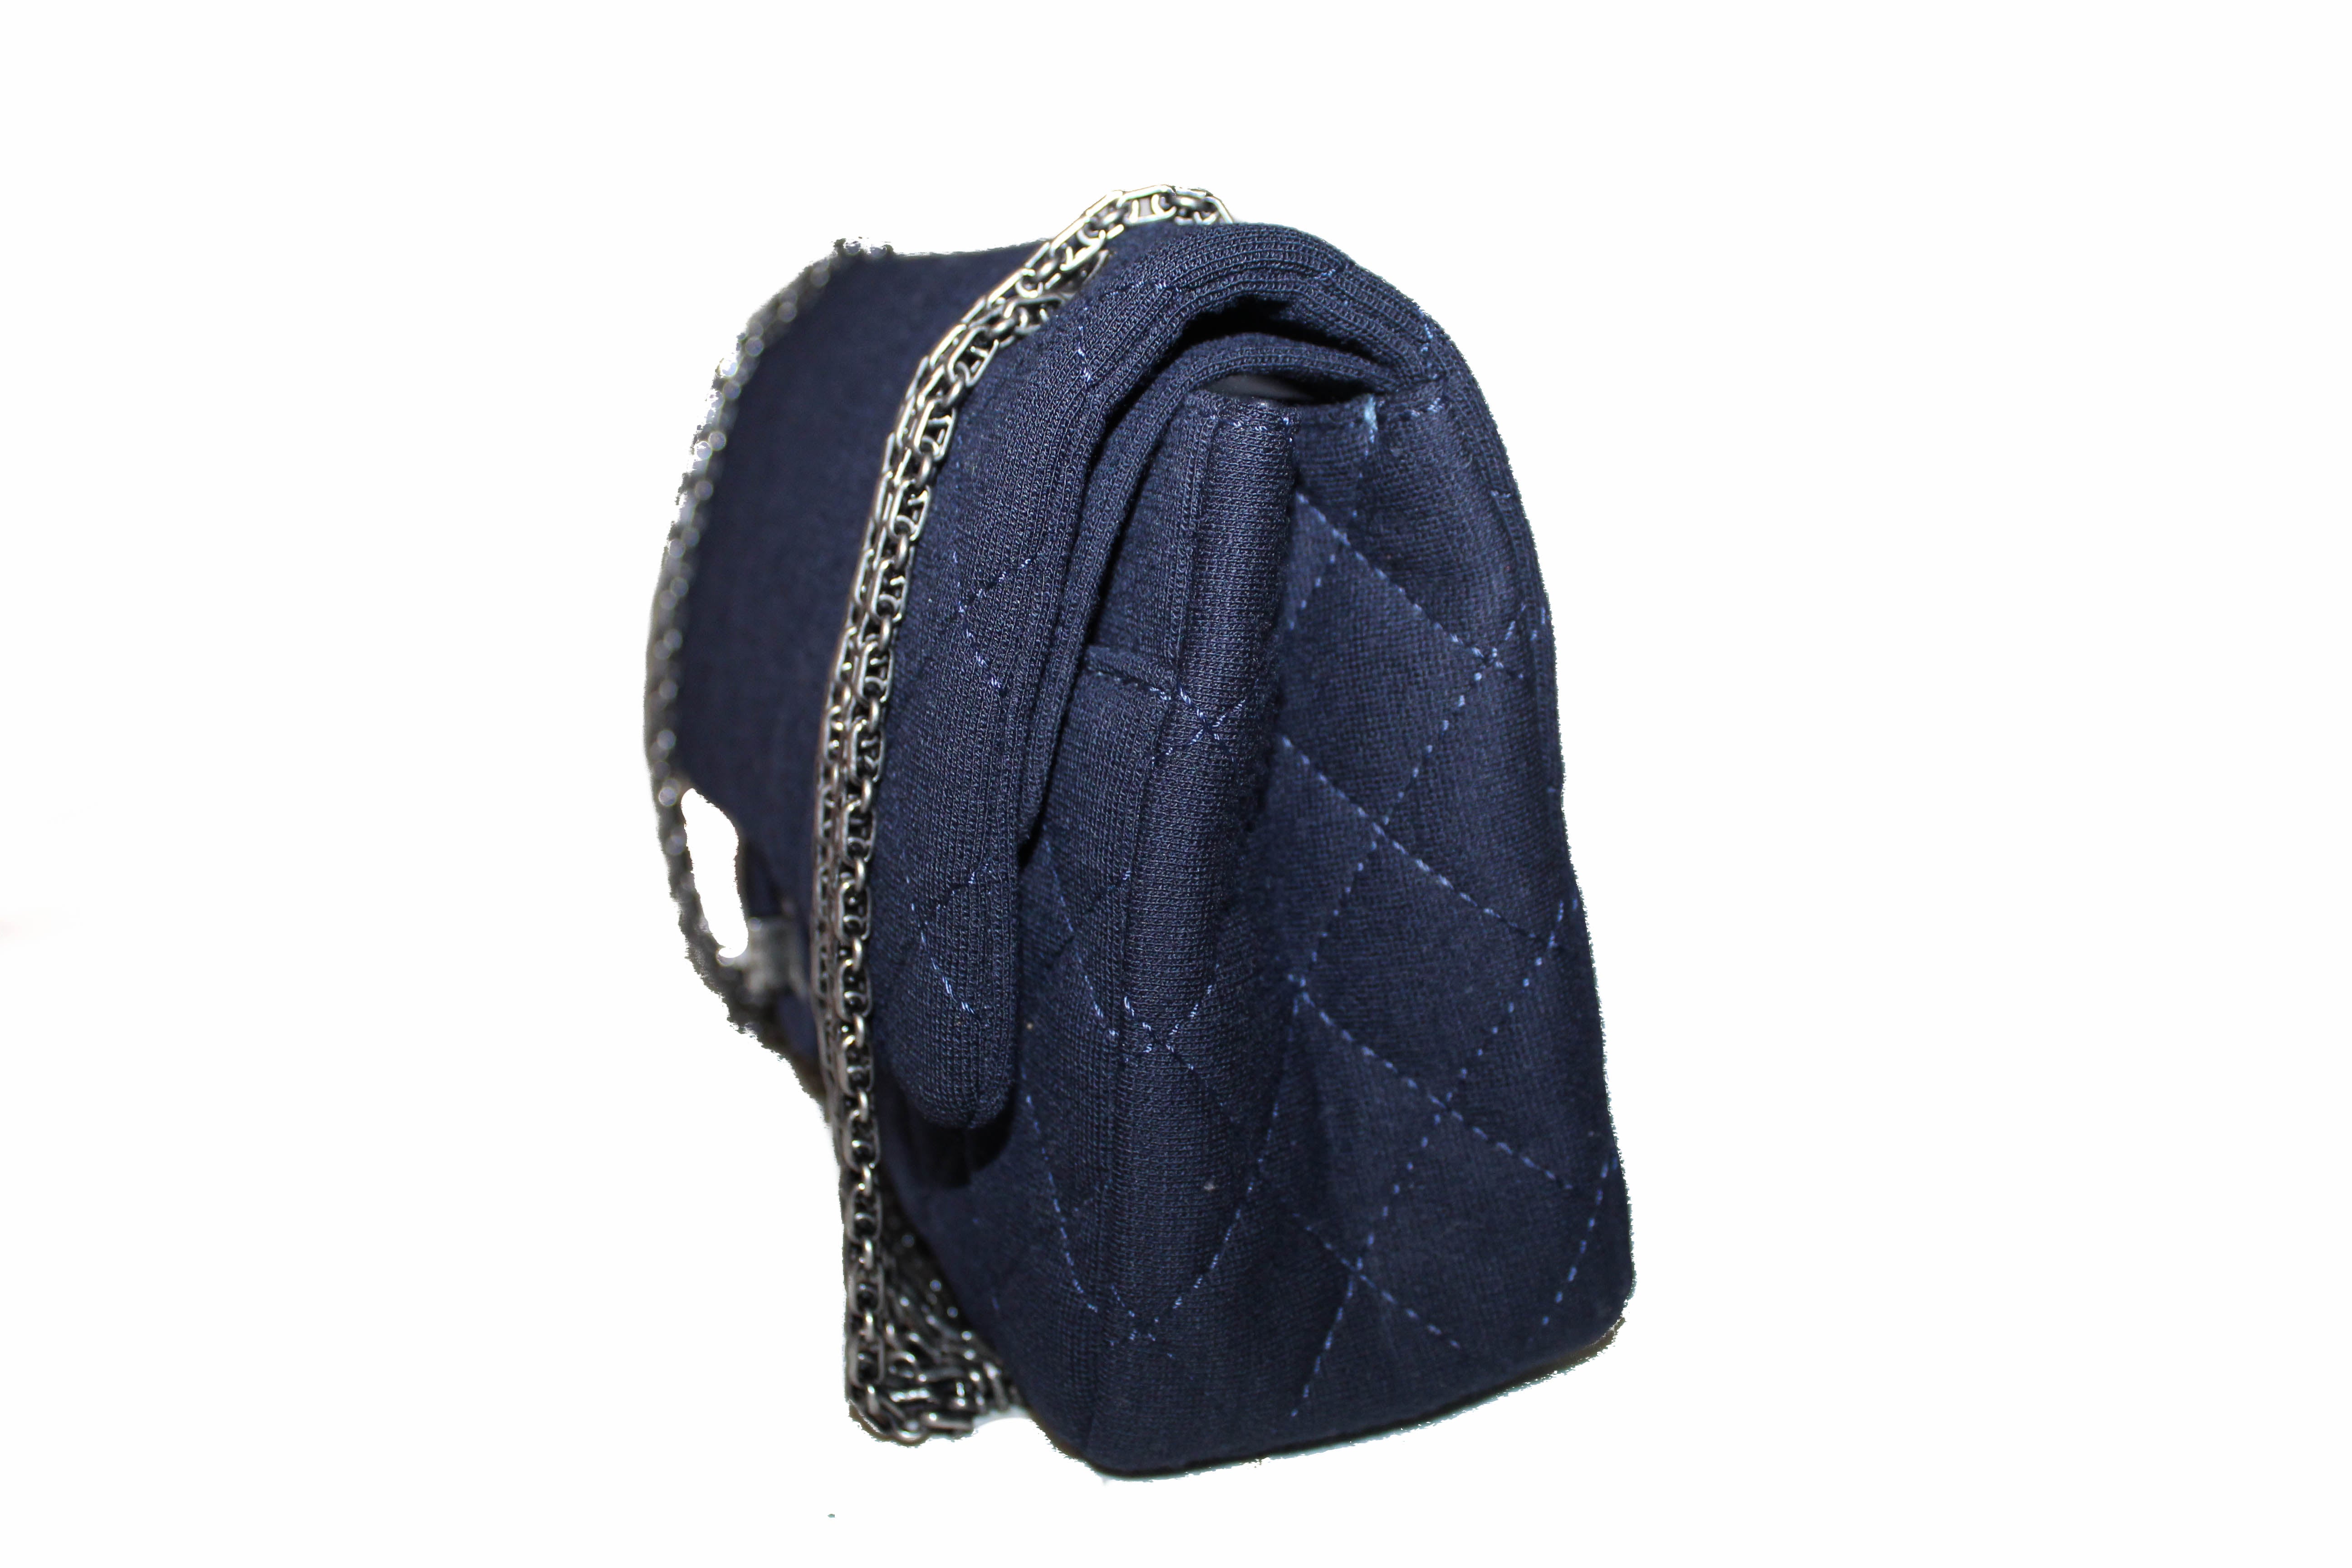 Authentic Chanel Navy Blue Fabric Canvas Jersey Large 2.55 Reissue 226  Shoulder Bag